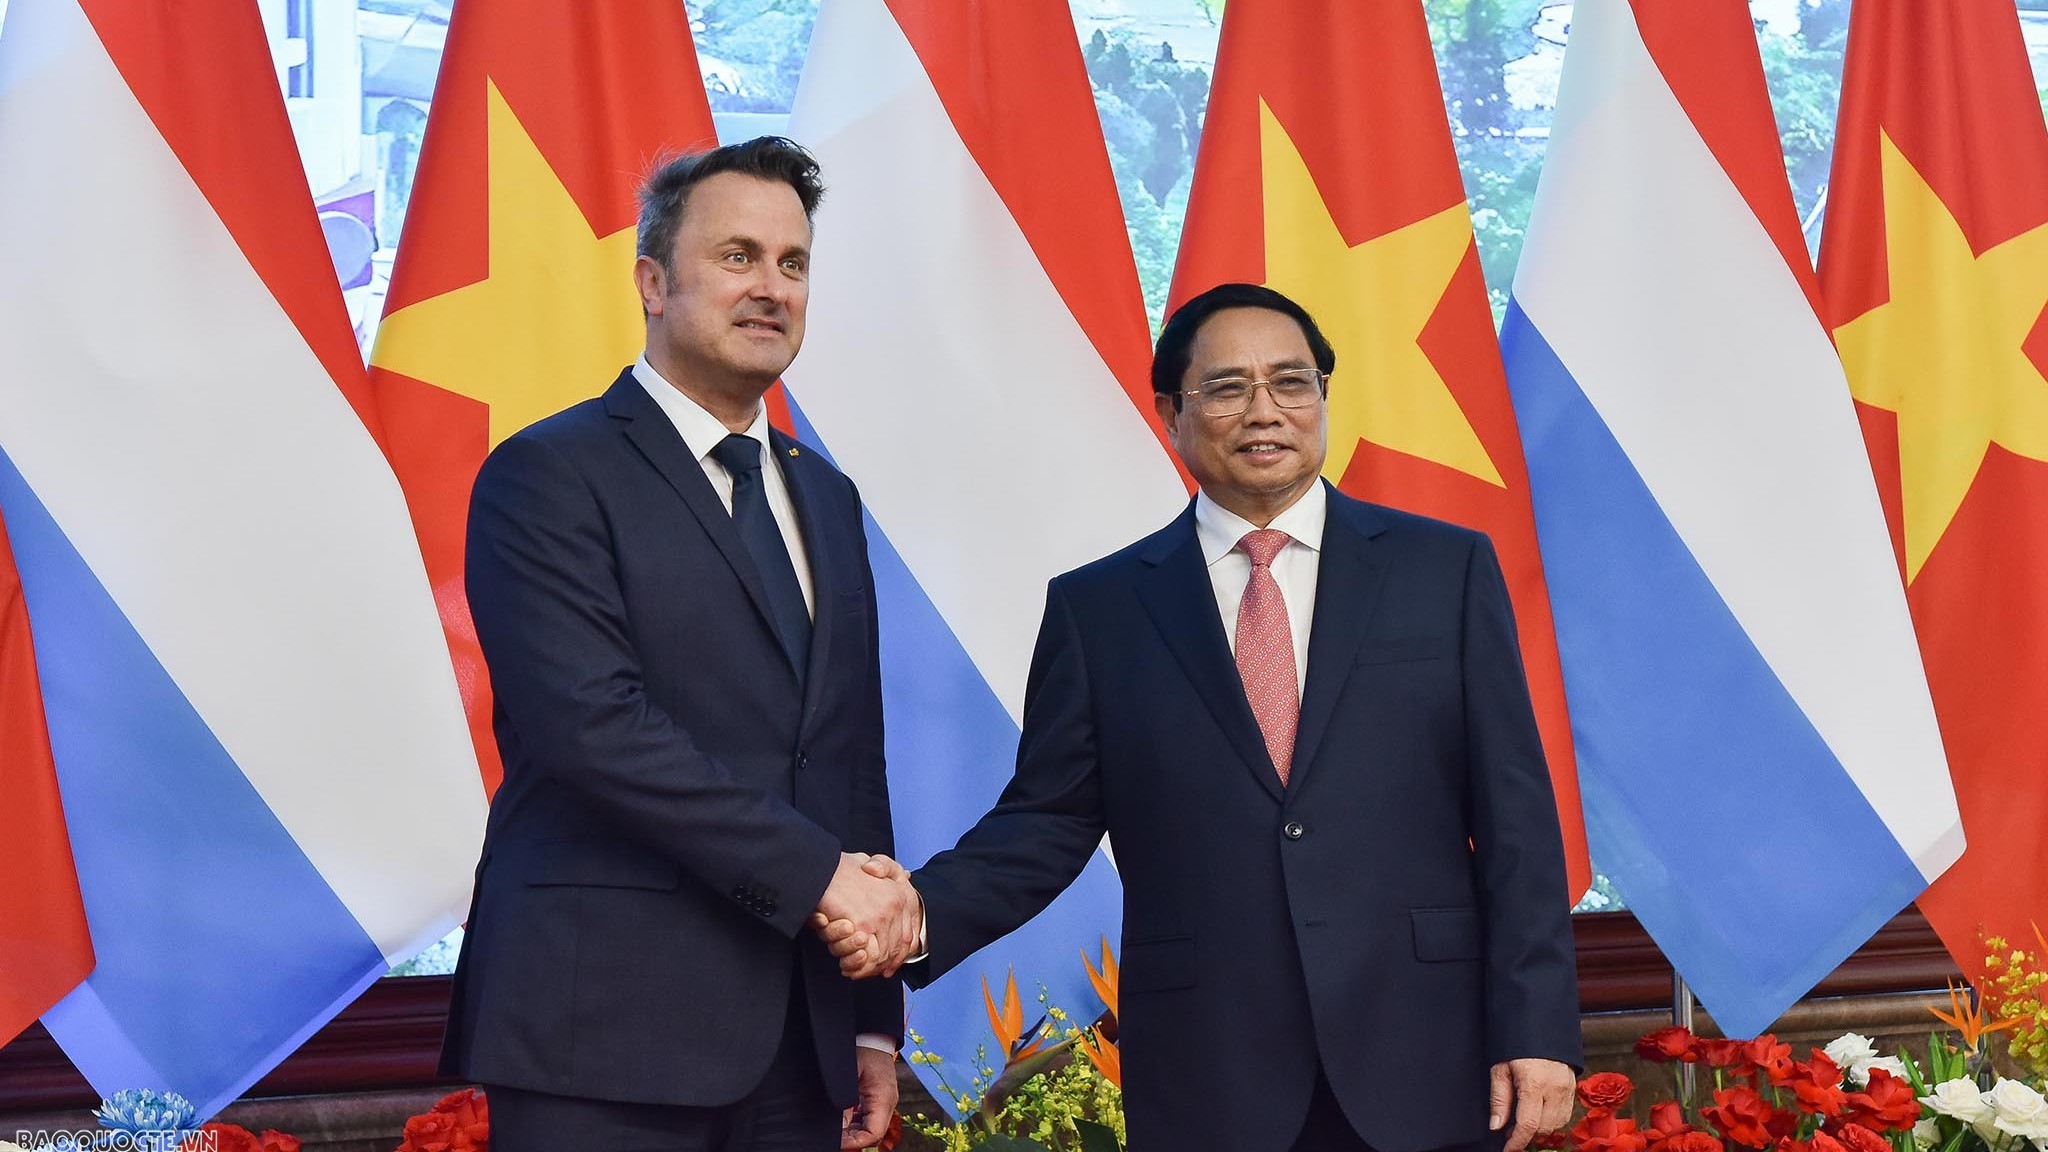 Luxembourg Prime Minister Xavier Bettel concluded official visit to Vietnam